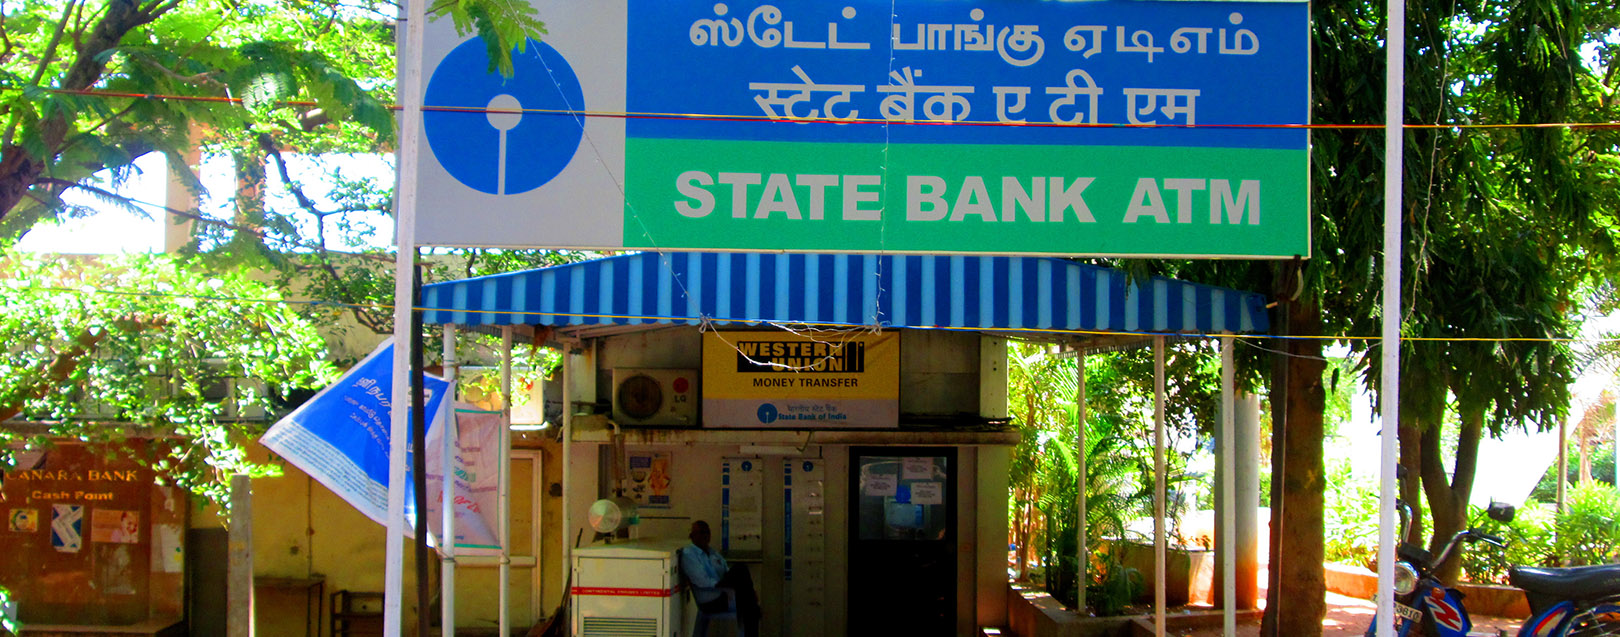 6 lakh SBI debit cards recalled; HDFC, Axis, ICICI, Yes Bank cards also compromised